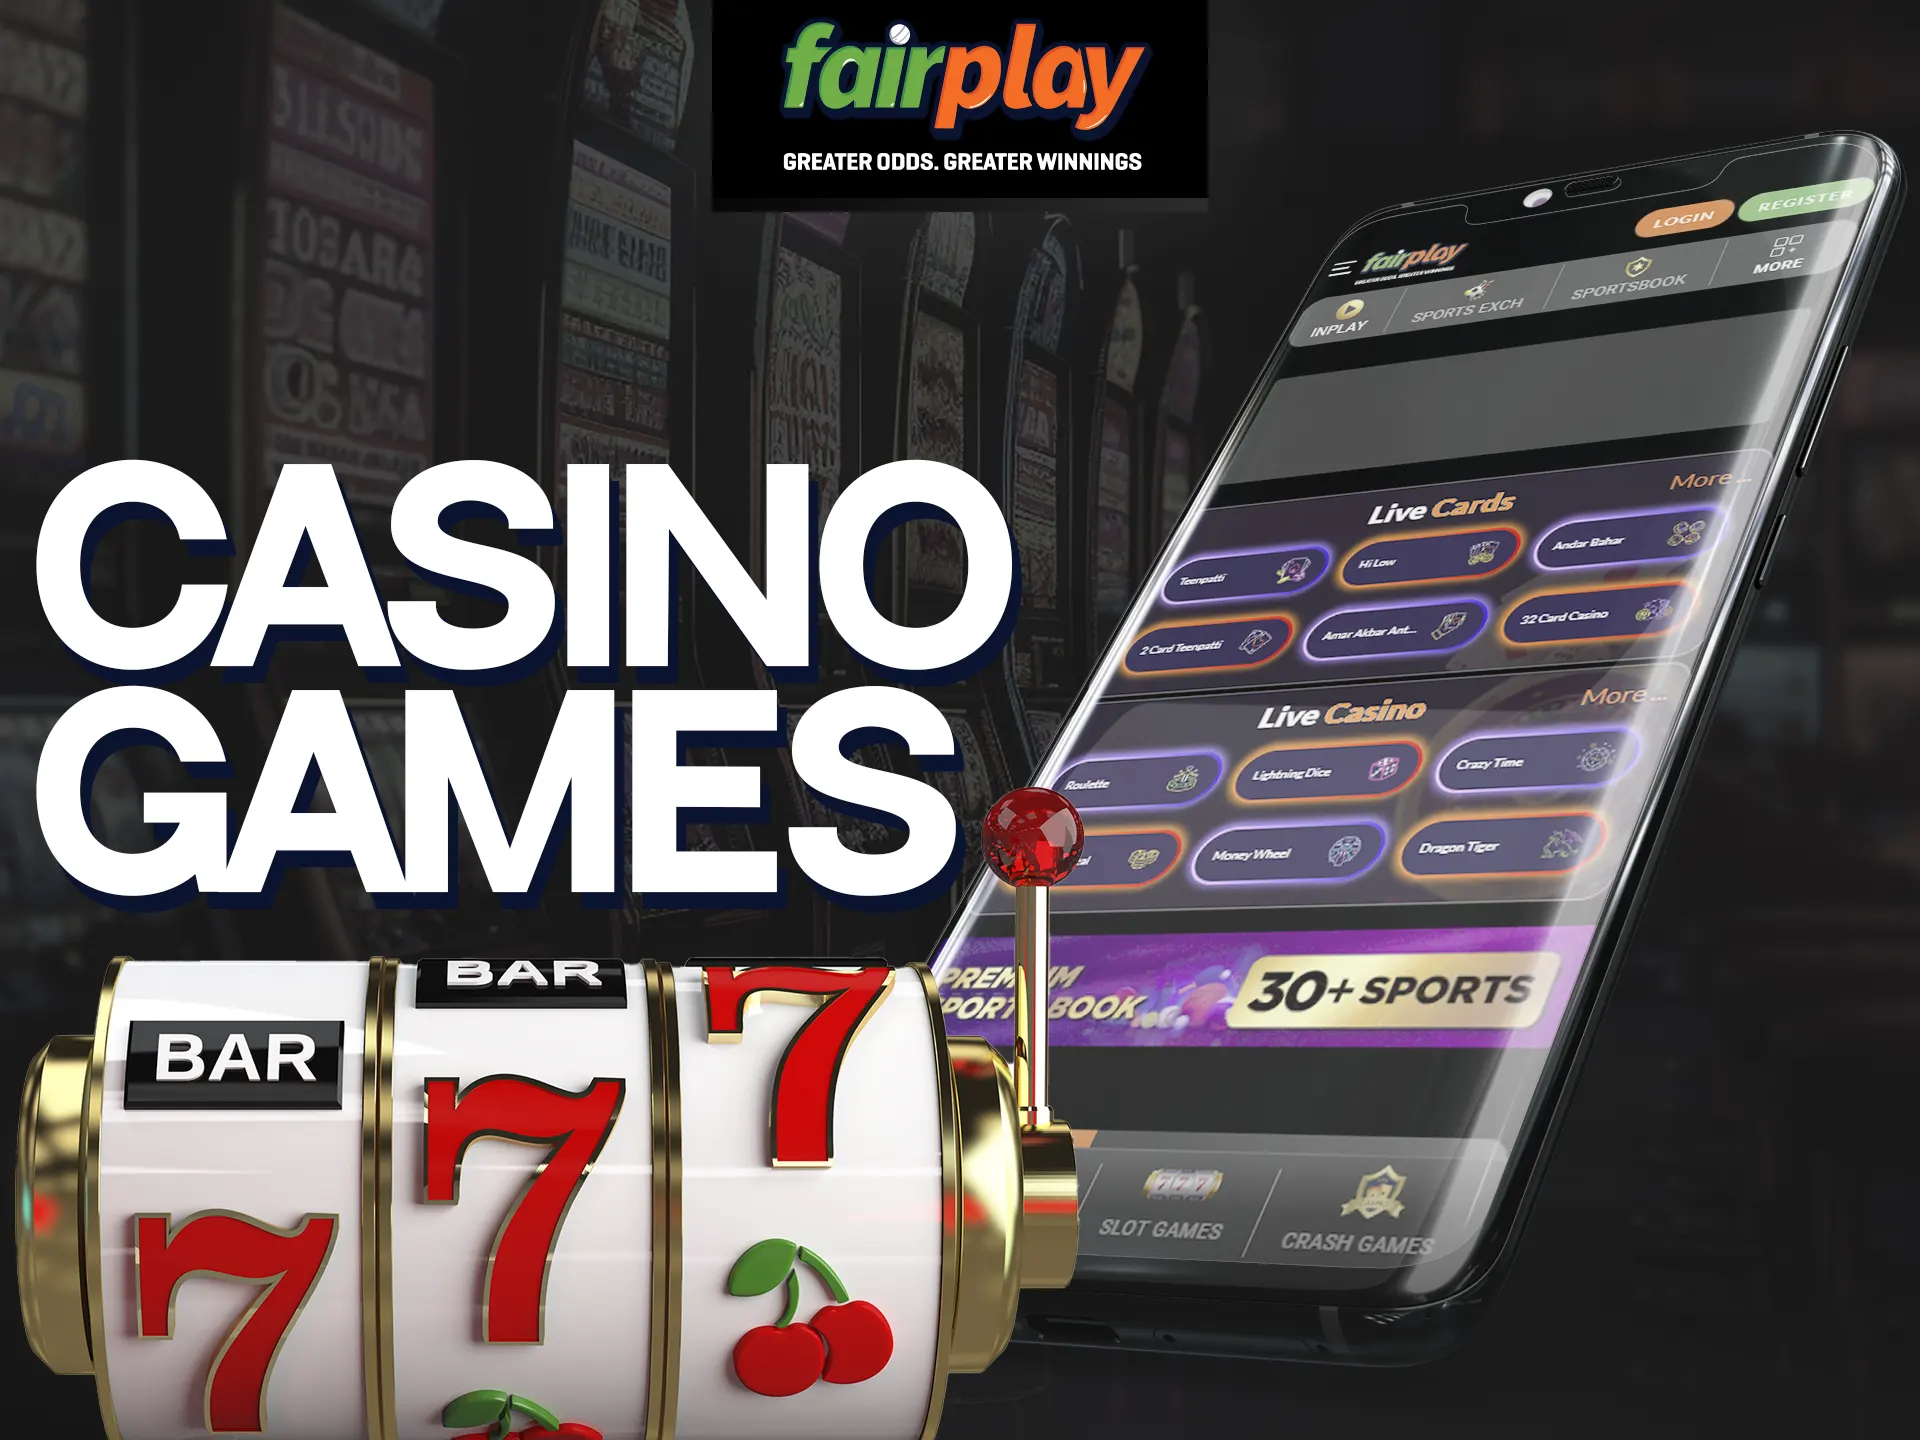 Play Casino Games at Fairplay and enjoy a high-number of playing options.